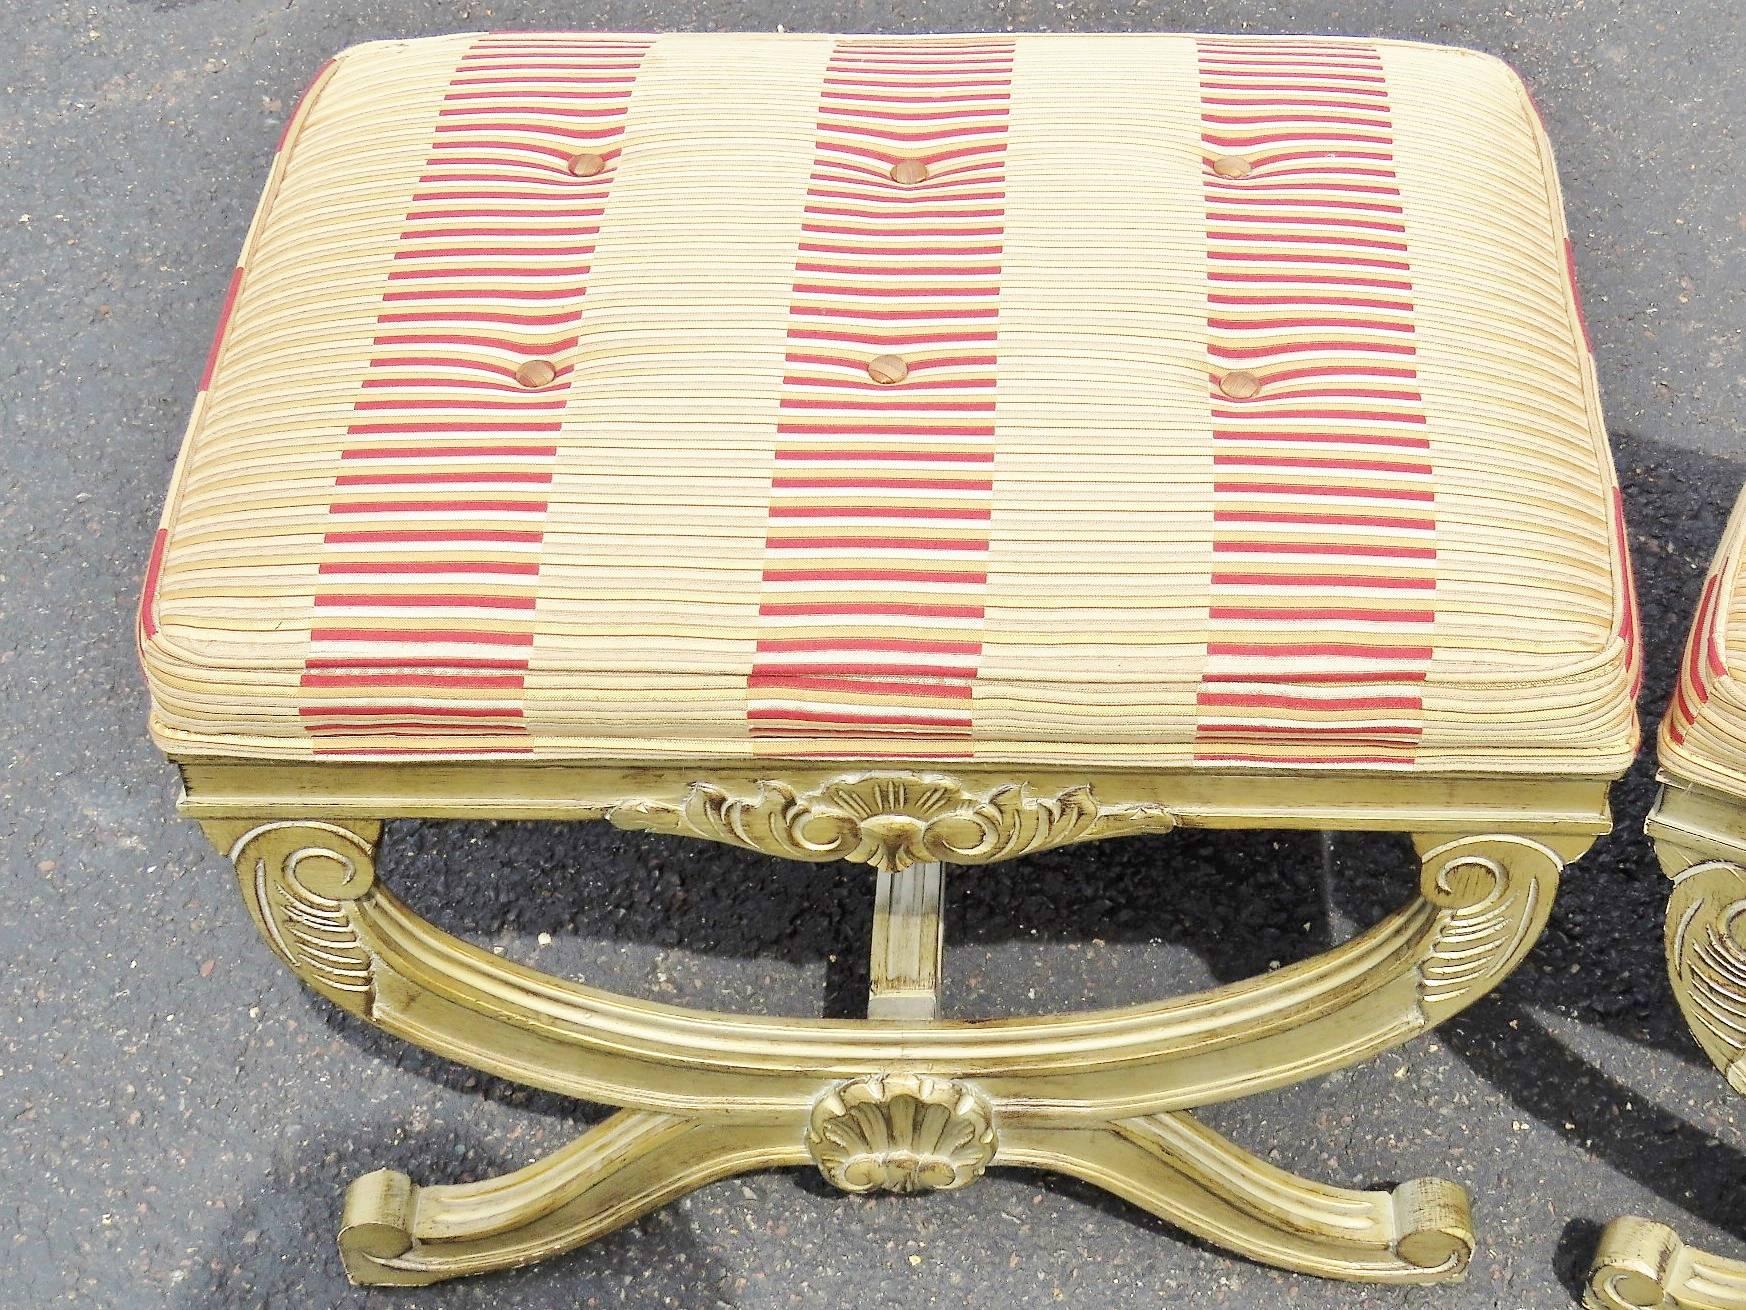 Distressed cream painted frames with shell motifs. Red and cream striped upholstery.